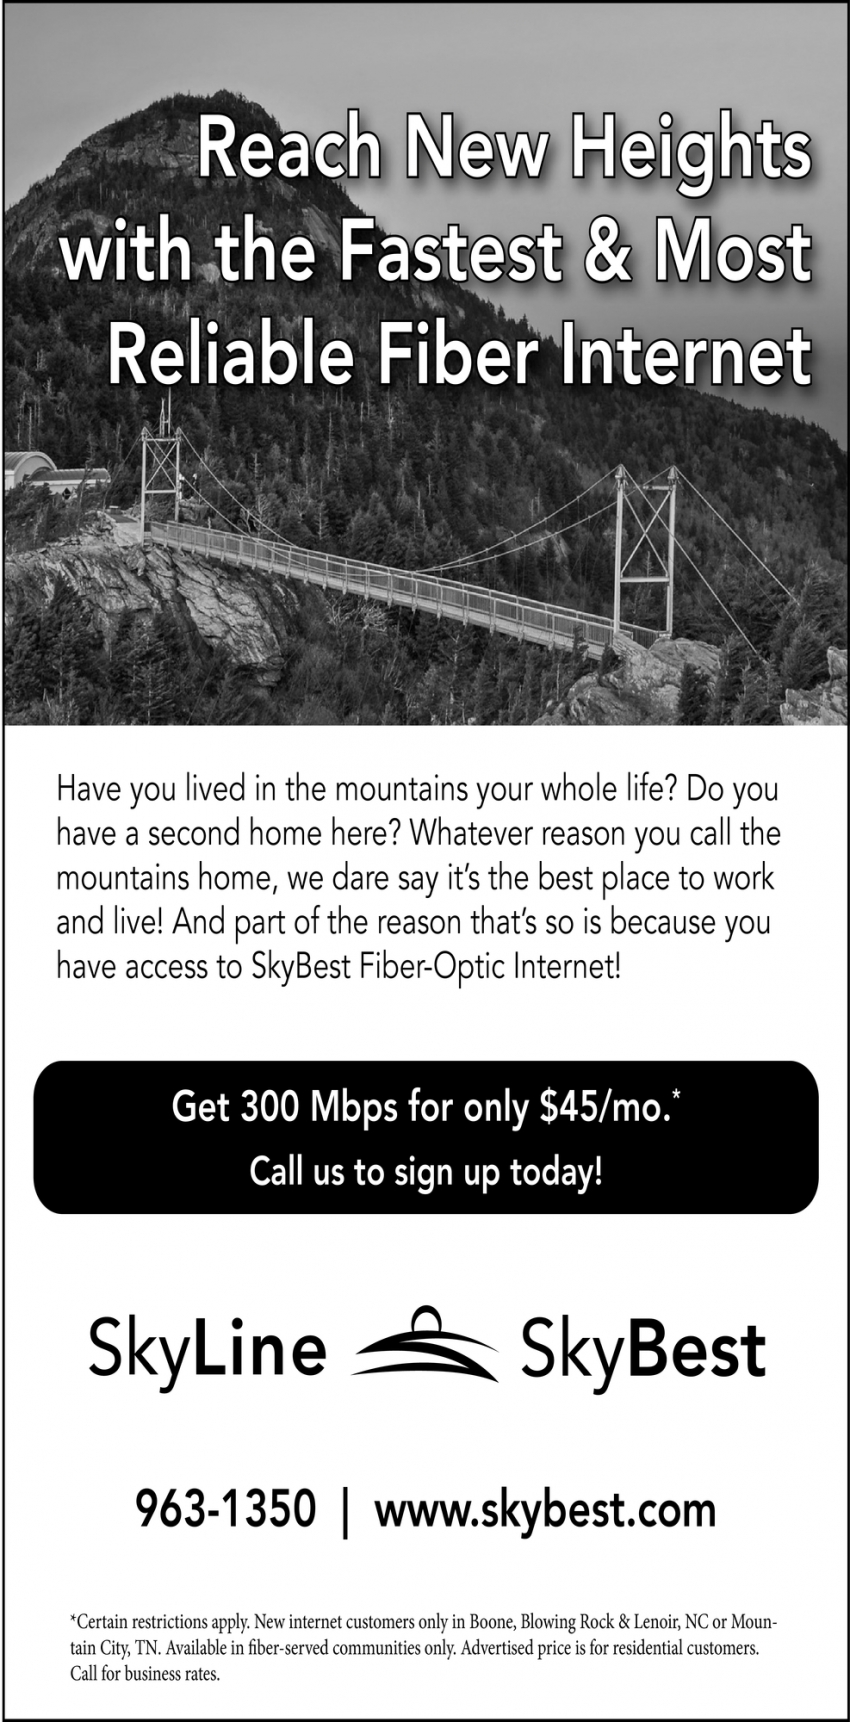 Reach New Heights with the Fastest & Most Reliable Fiber Internet